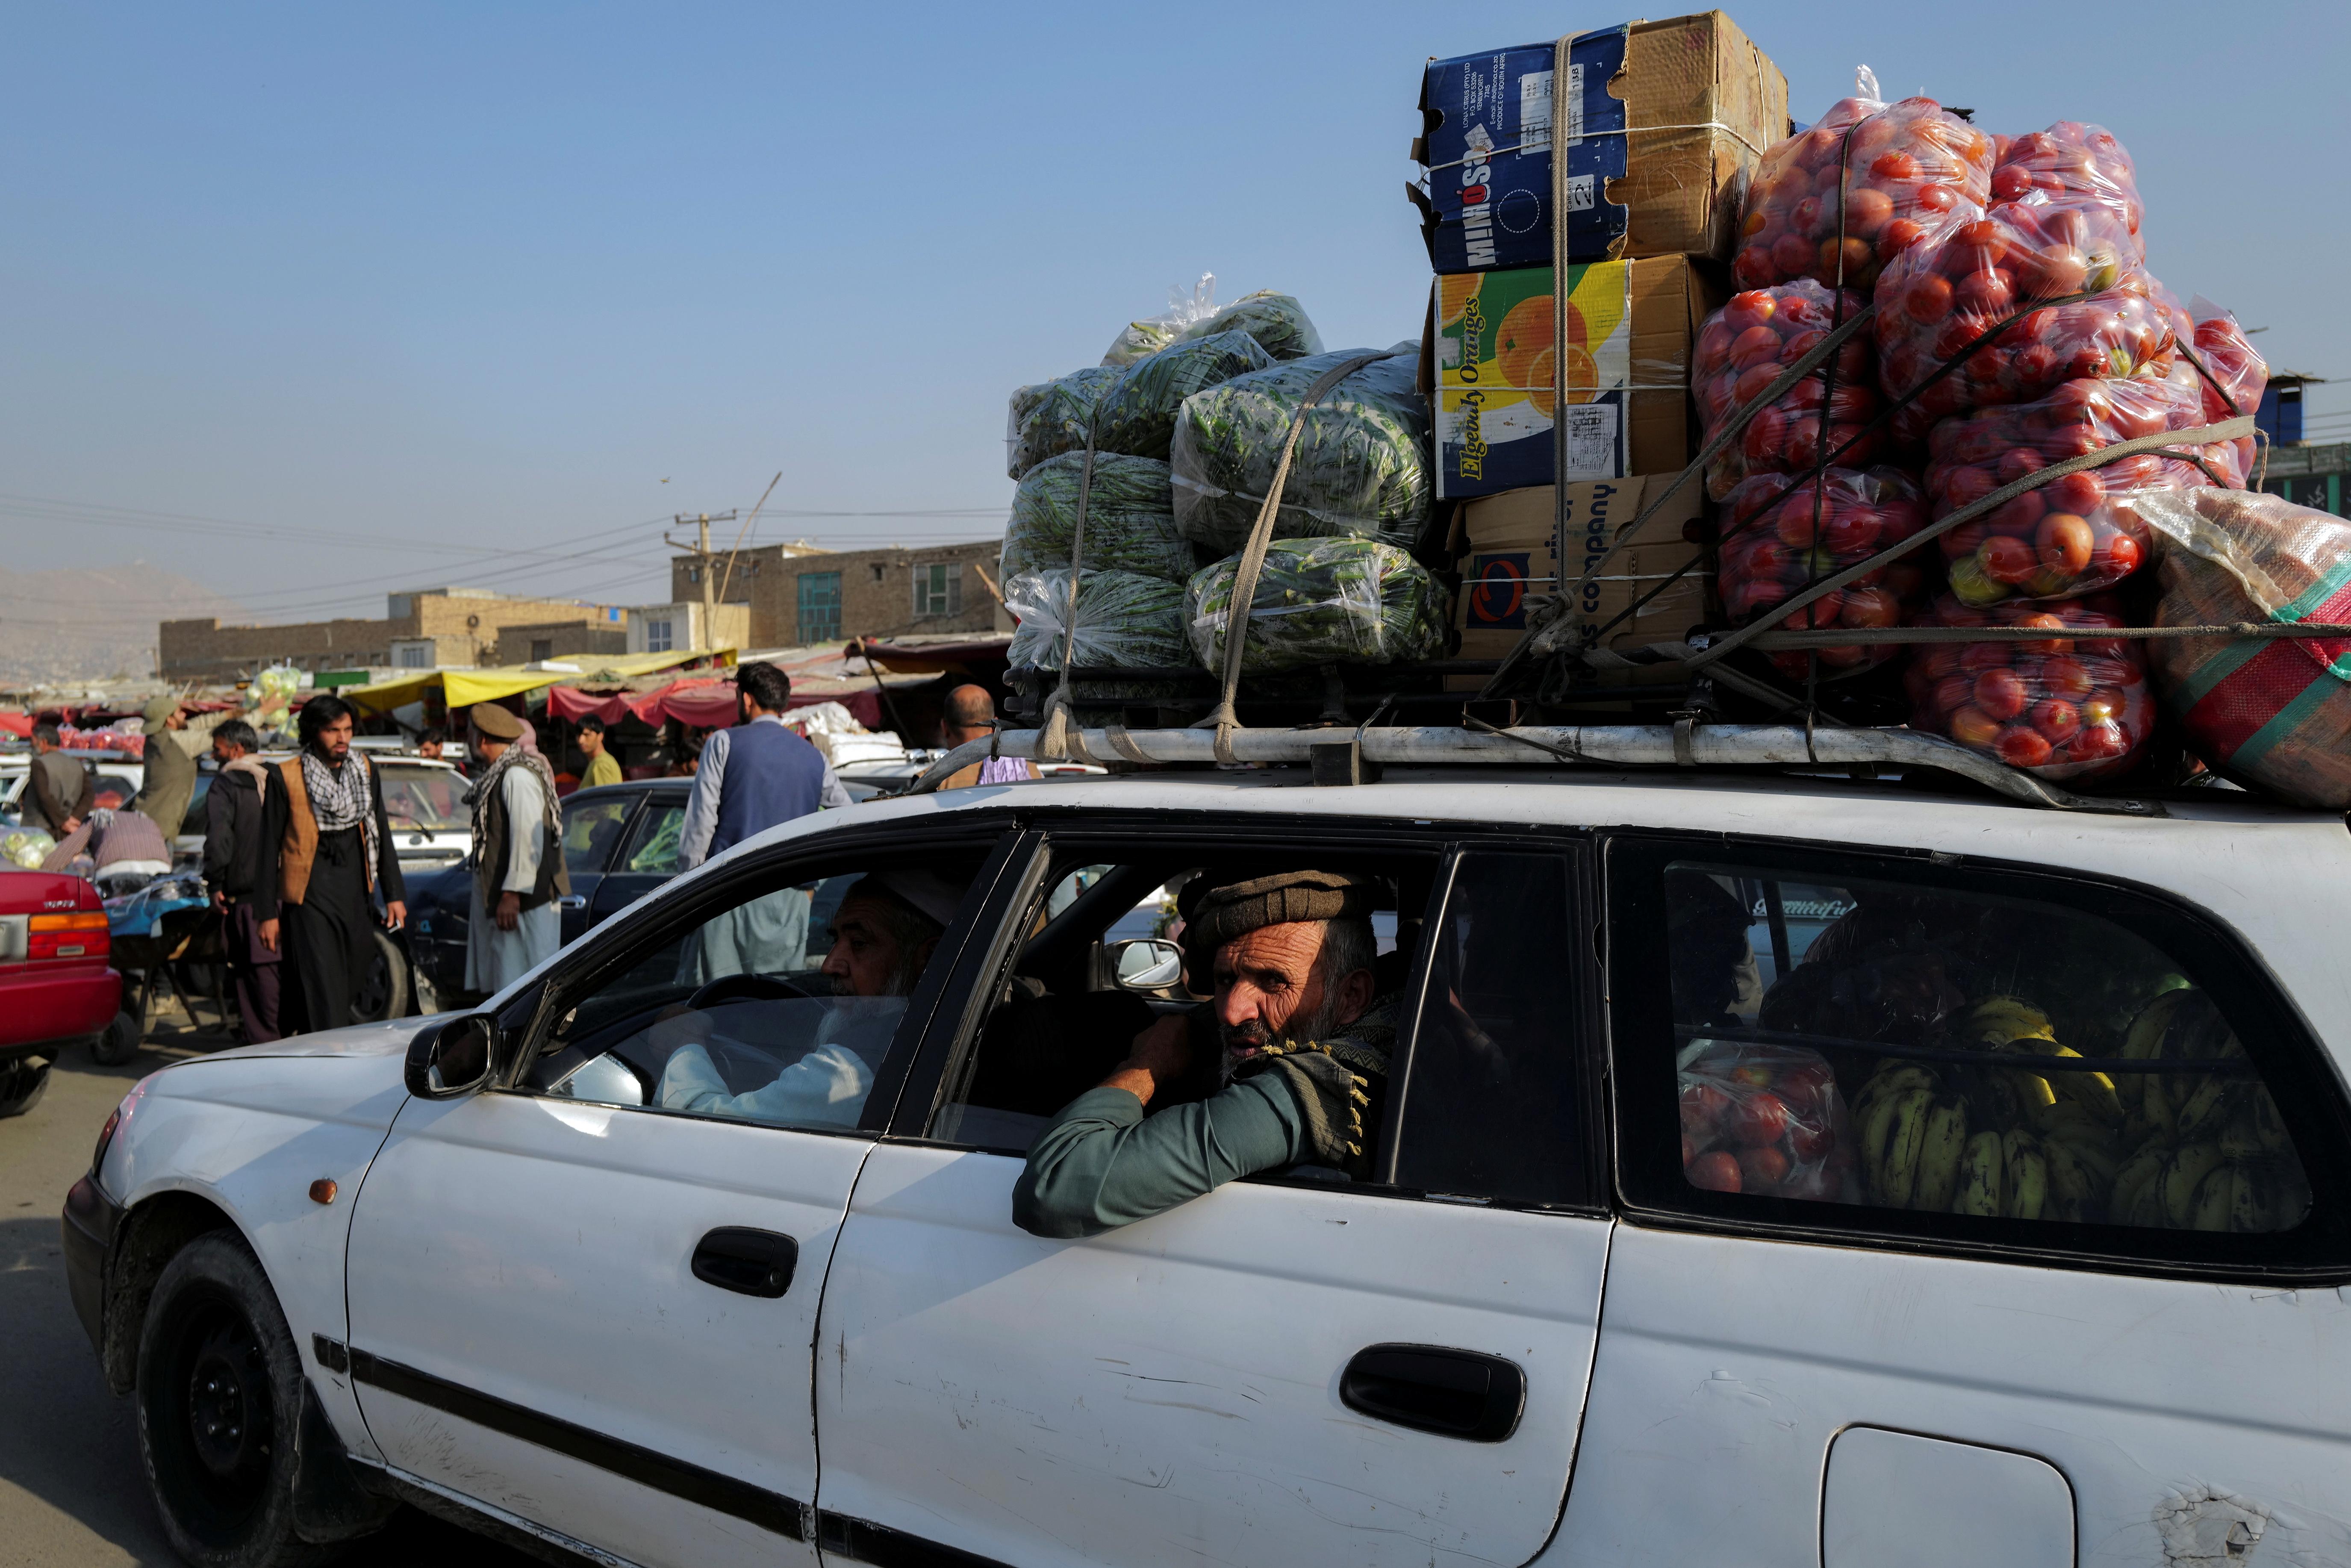 A man rides a car filled with vegetables and fruits for sale at the market in Kabul